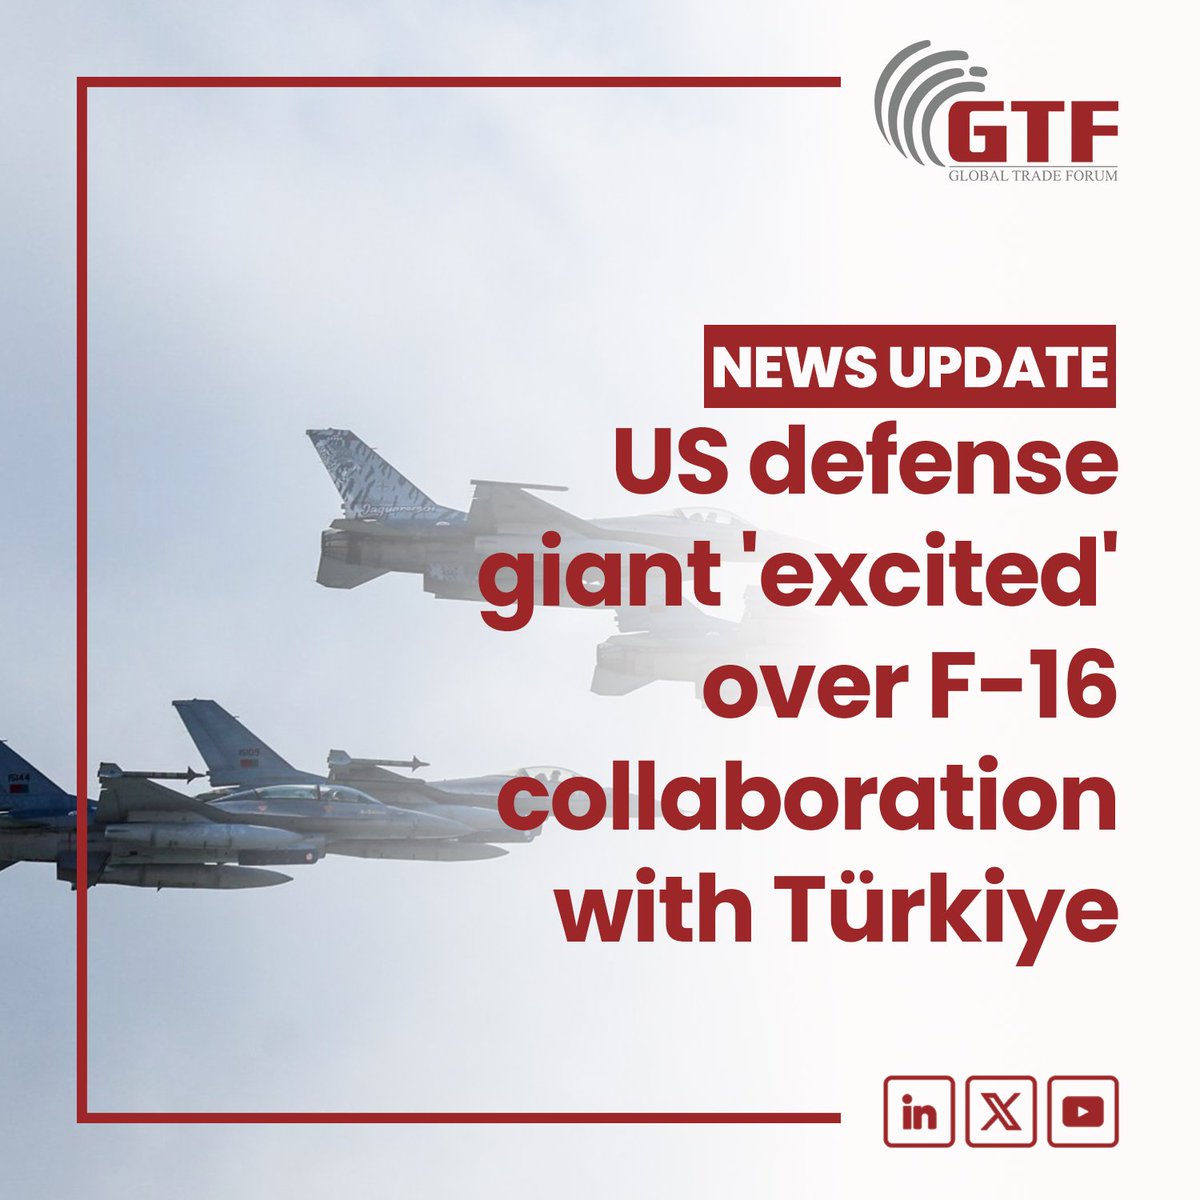 U.S. defense and aerospace giant Lockheed Martin expressed excitement about the opportunity to collaborate once again with its Turkish counterparts on the Block 70 series of jets.
#TürkiyeTrade #GTF2024 #GlobalTradeForum #EUTradeRelations #EuropeEconomy #TradeDiplomacy